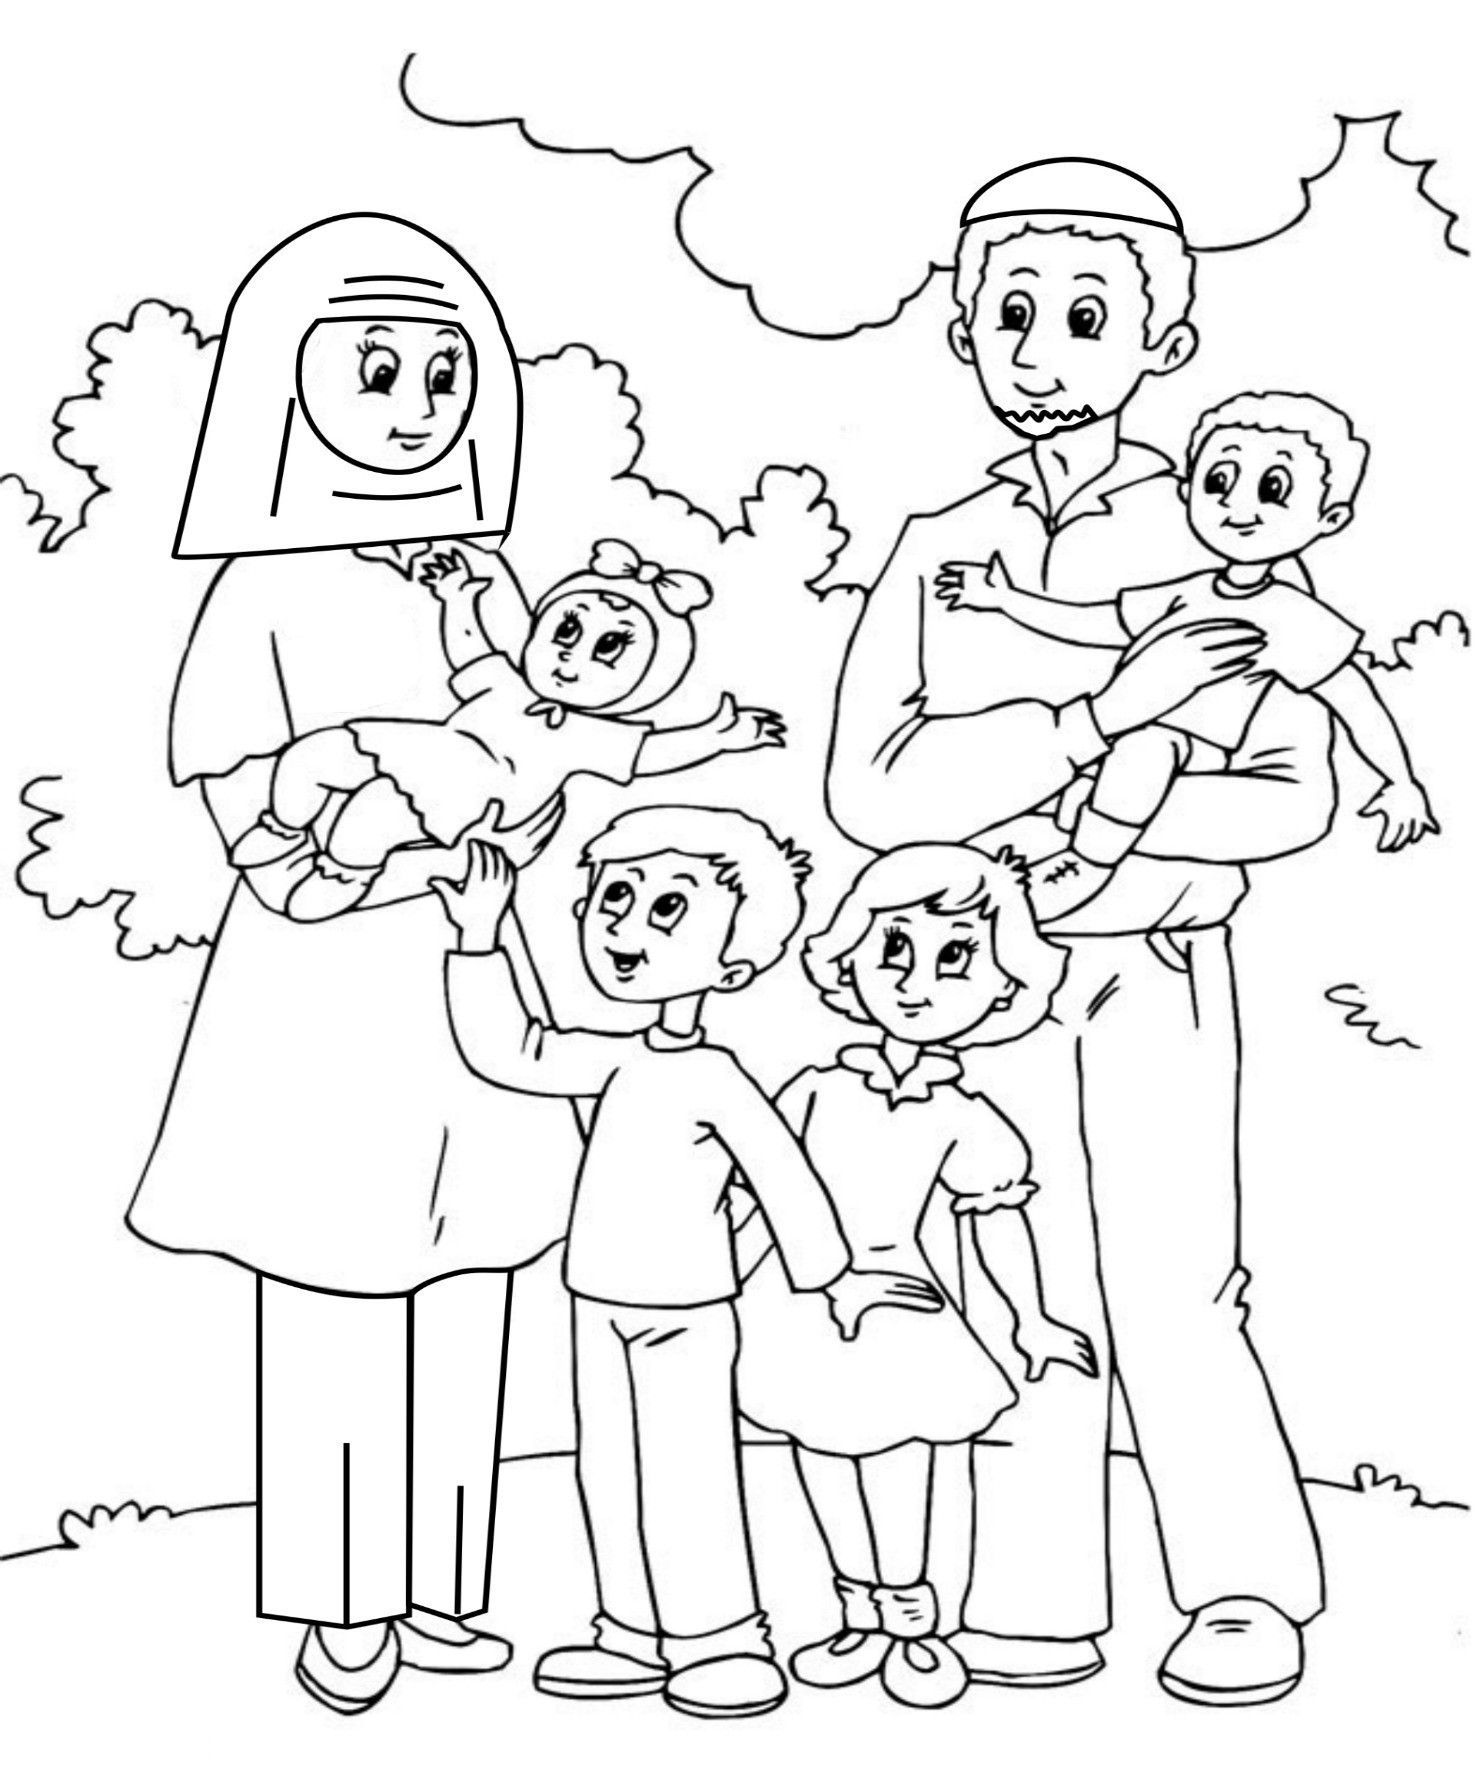 Happy Family Coloring Page At GetColorings Free Printable Colorings Pages To Print And Color